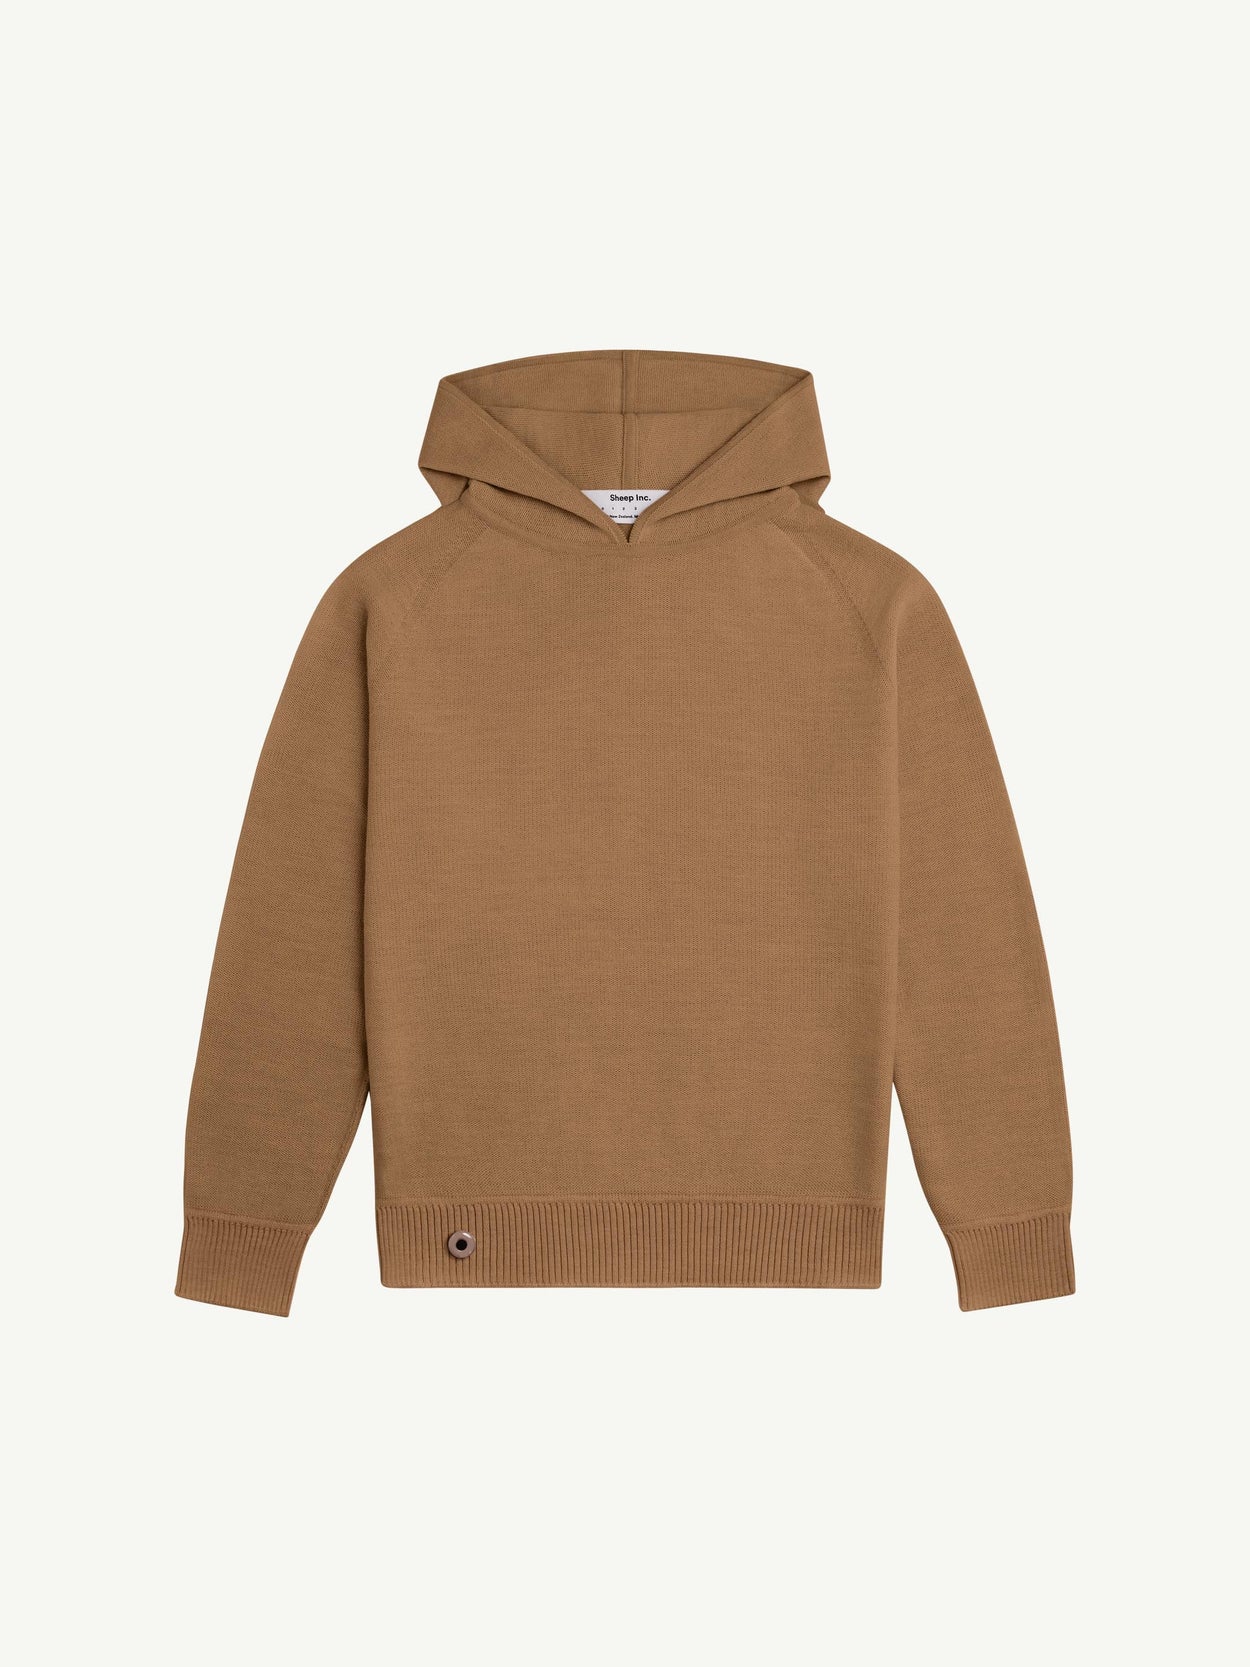 lv supreme brown hoodie - OFF-70% > Shipping free